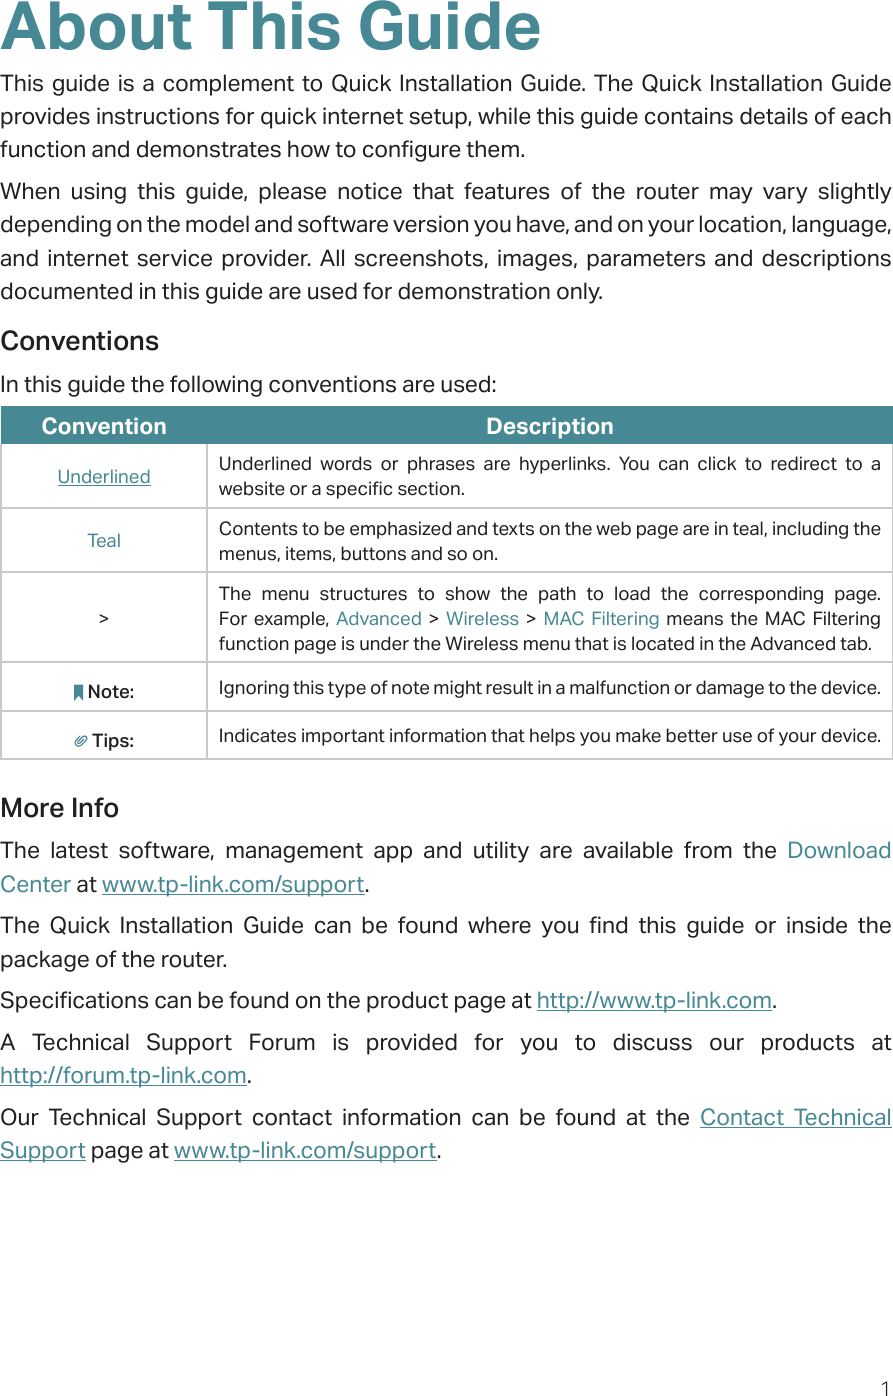 1About This GuideThis guide is a complement to Quick Installation Guide. The Quick Installation Guide provides instructions for quick internet setup, while this guide contains details of each function and demonstrates how to configure them. When using this guide, please notice that features of the router may vary slightly depending on the model and software version you have, and on your location, language, and internet service provider. All screenshots, images, parameters and descriptions documented in this guide are used for demonstration only.ConventionsIn this guide the following conventions are used:Convention DescriptionUnderlined Underlined words or phrases are hyperlinks. You can click to redirect to a website or a specific section.Teal Contents to be emphasized and texts on the web page are in teal, including the menus, items, buttons and so on.&gt;The menu structures to show the path to load the corresponding page. For example, Advanced &gt; Wireless &gt; MAC Filtering means the MAC Filtering function page is under the Wireless menu that is located in the Advanced tab.Note: Ignoring this type of note might result in a malfunction or damage to the device.Tips: Indicates important information that helps you make better use of your device.More InfoThe latest software, management app and utility are available from the Download Center at www.tp-link.com/support.The Quick Installation Guide can be found where you find this guide or inside the package of the router.Specifications can be found on the product page at http://www.tp-link.com.A Technical Support Forum is provided for you to discuss our products at  http://forum.tp-link.com.Our Technical Support contact information can be found at the Contact Technical Support page at www.tp-link.com/support.